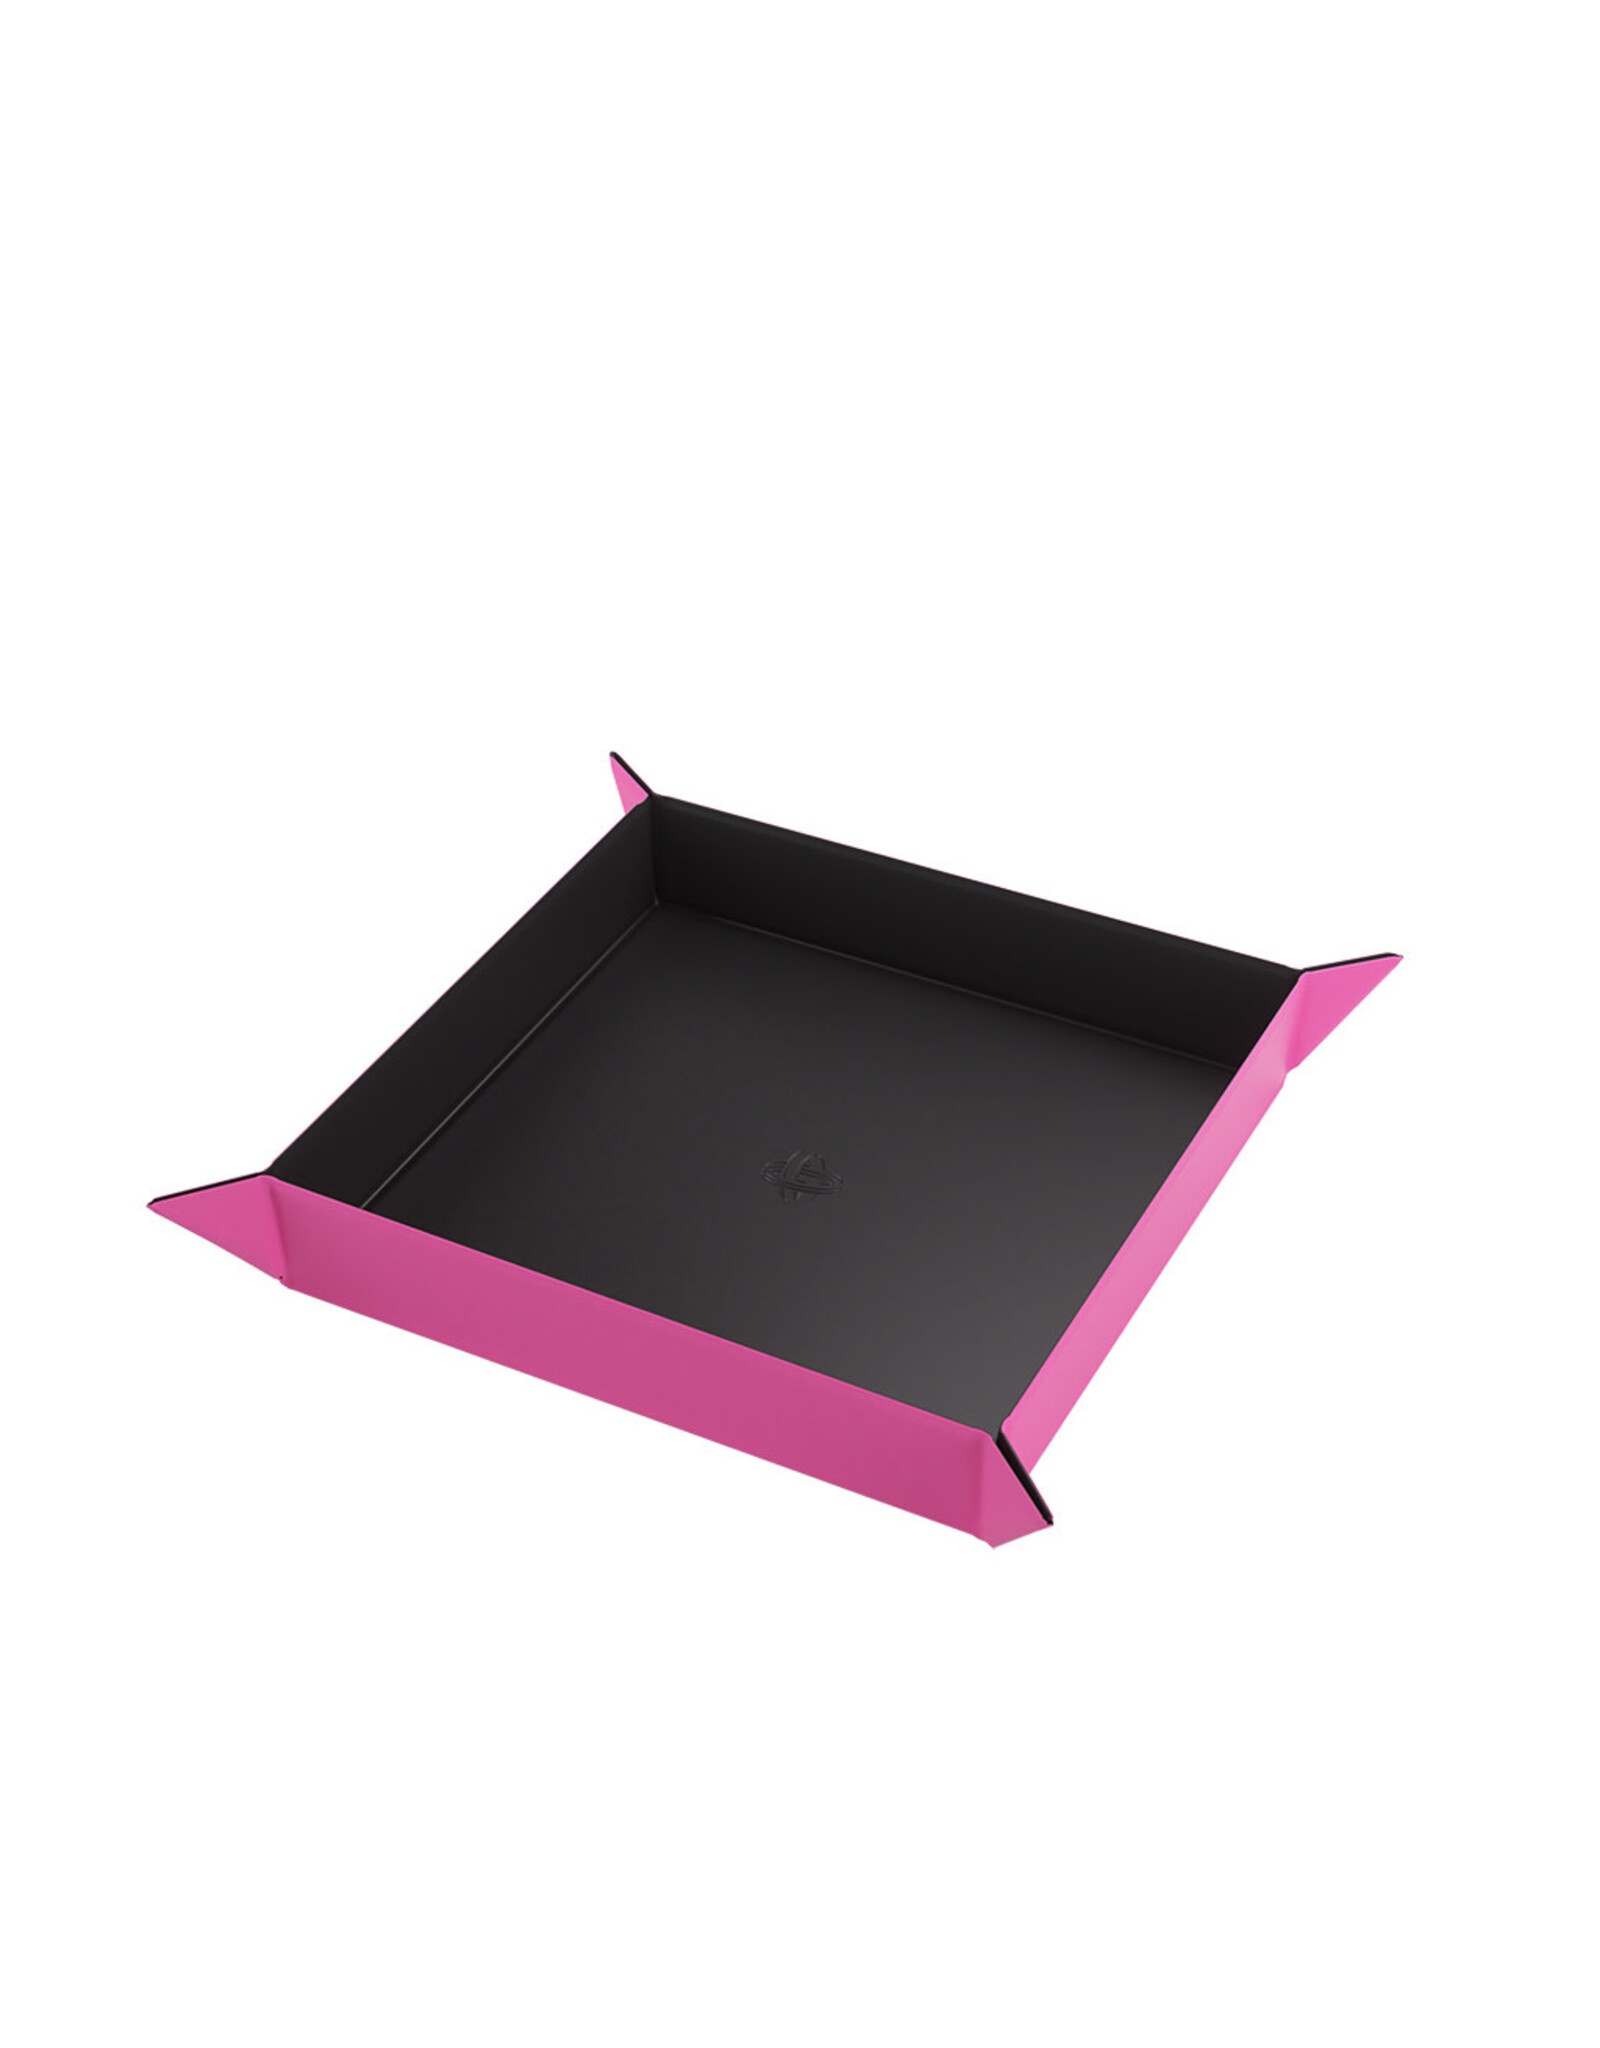 Gamegenic Gamegenic  Magnetic Dice Tray Square Black/Pink